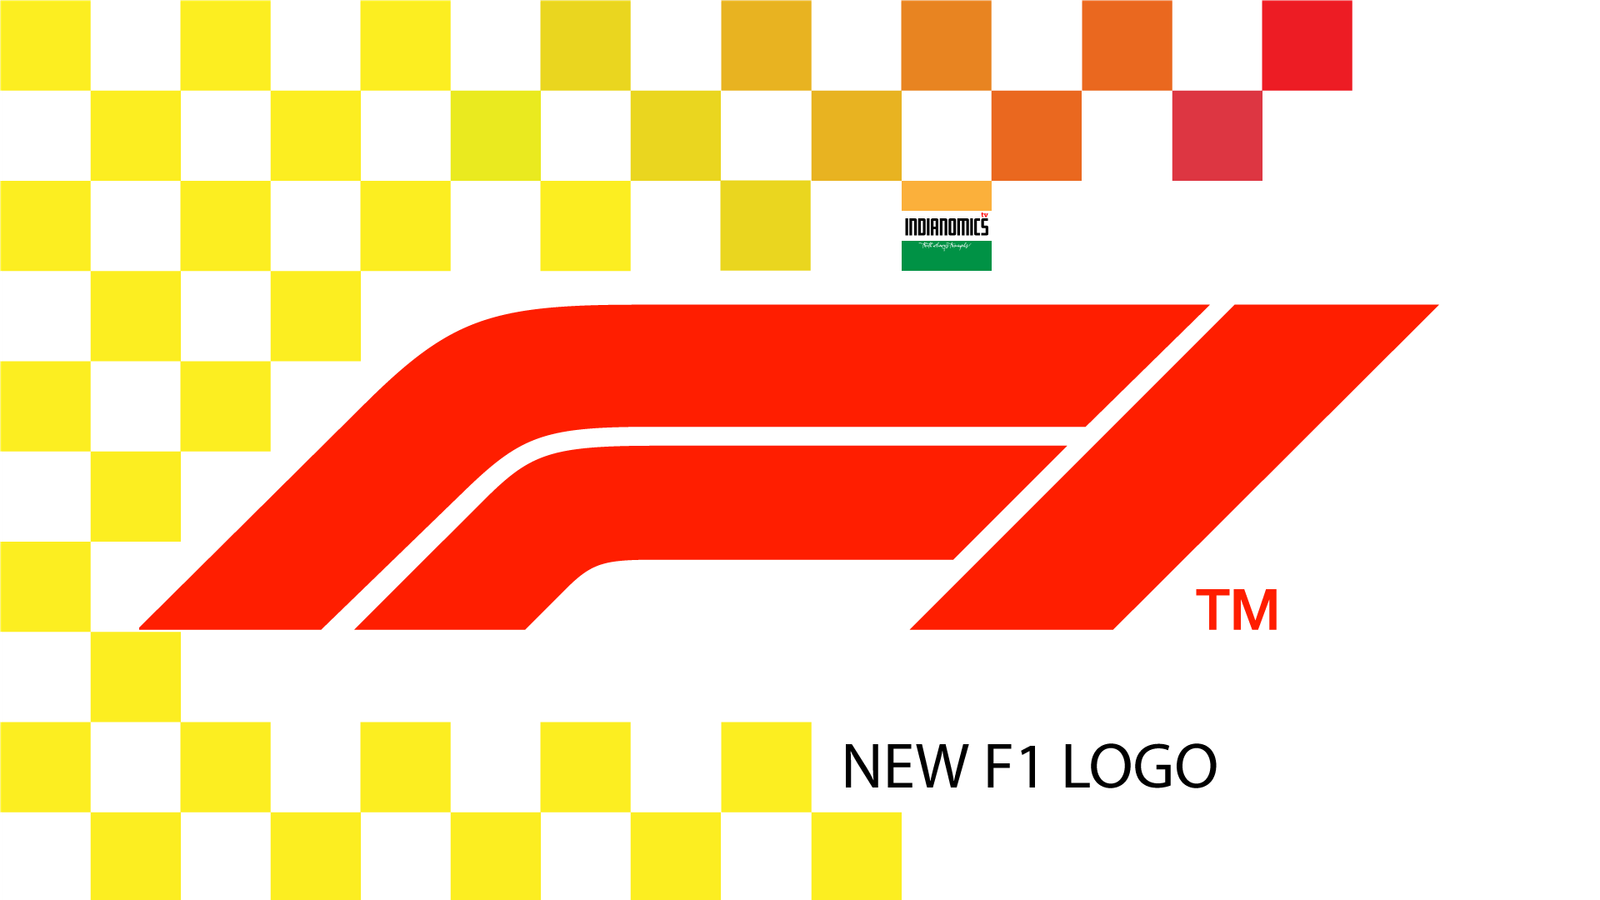 The new F1 logo unveiled at the end of Abu Dhabi Grand Prix, 2017